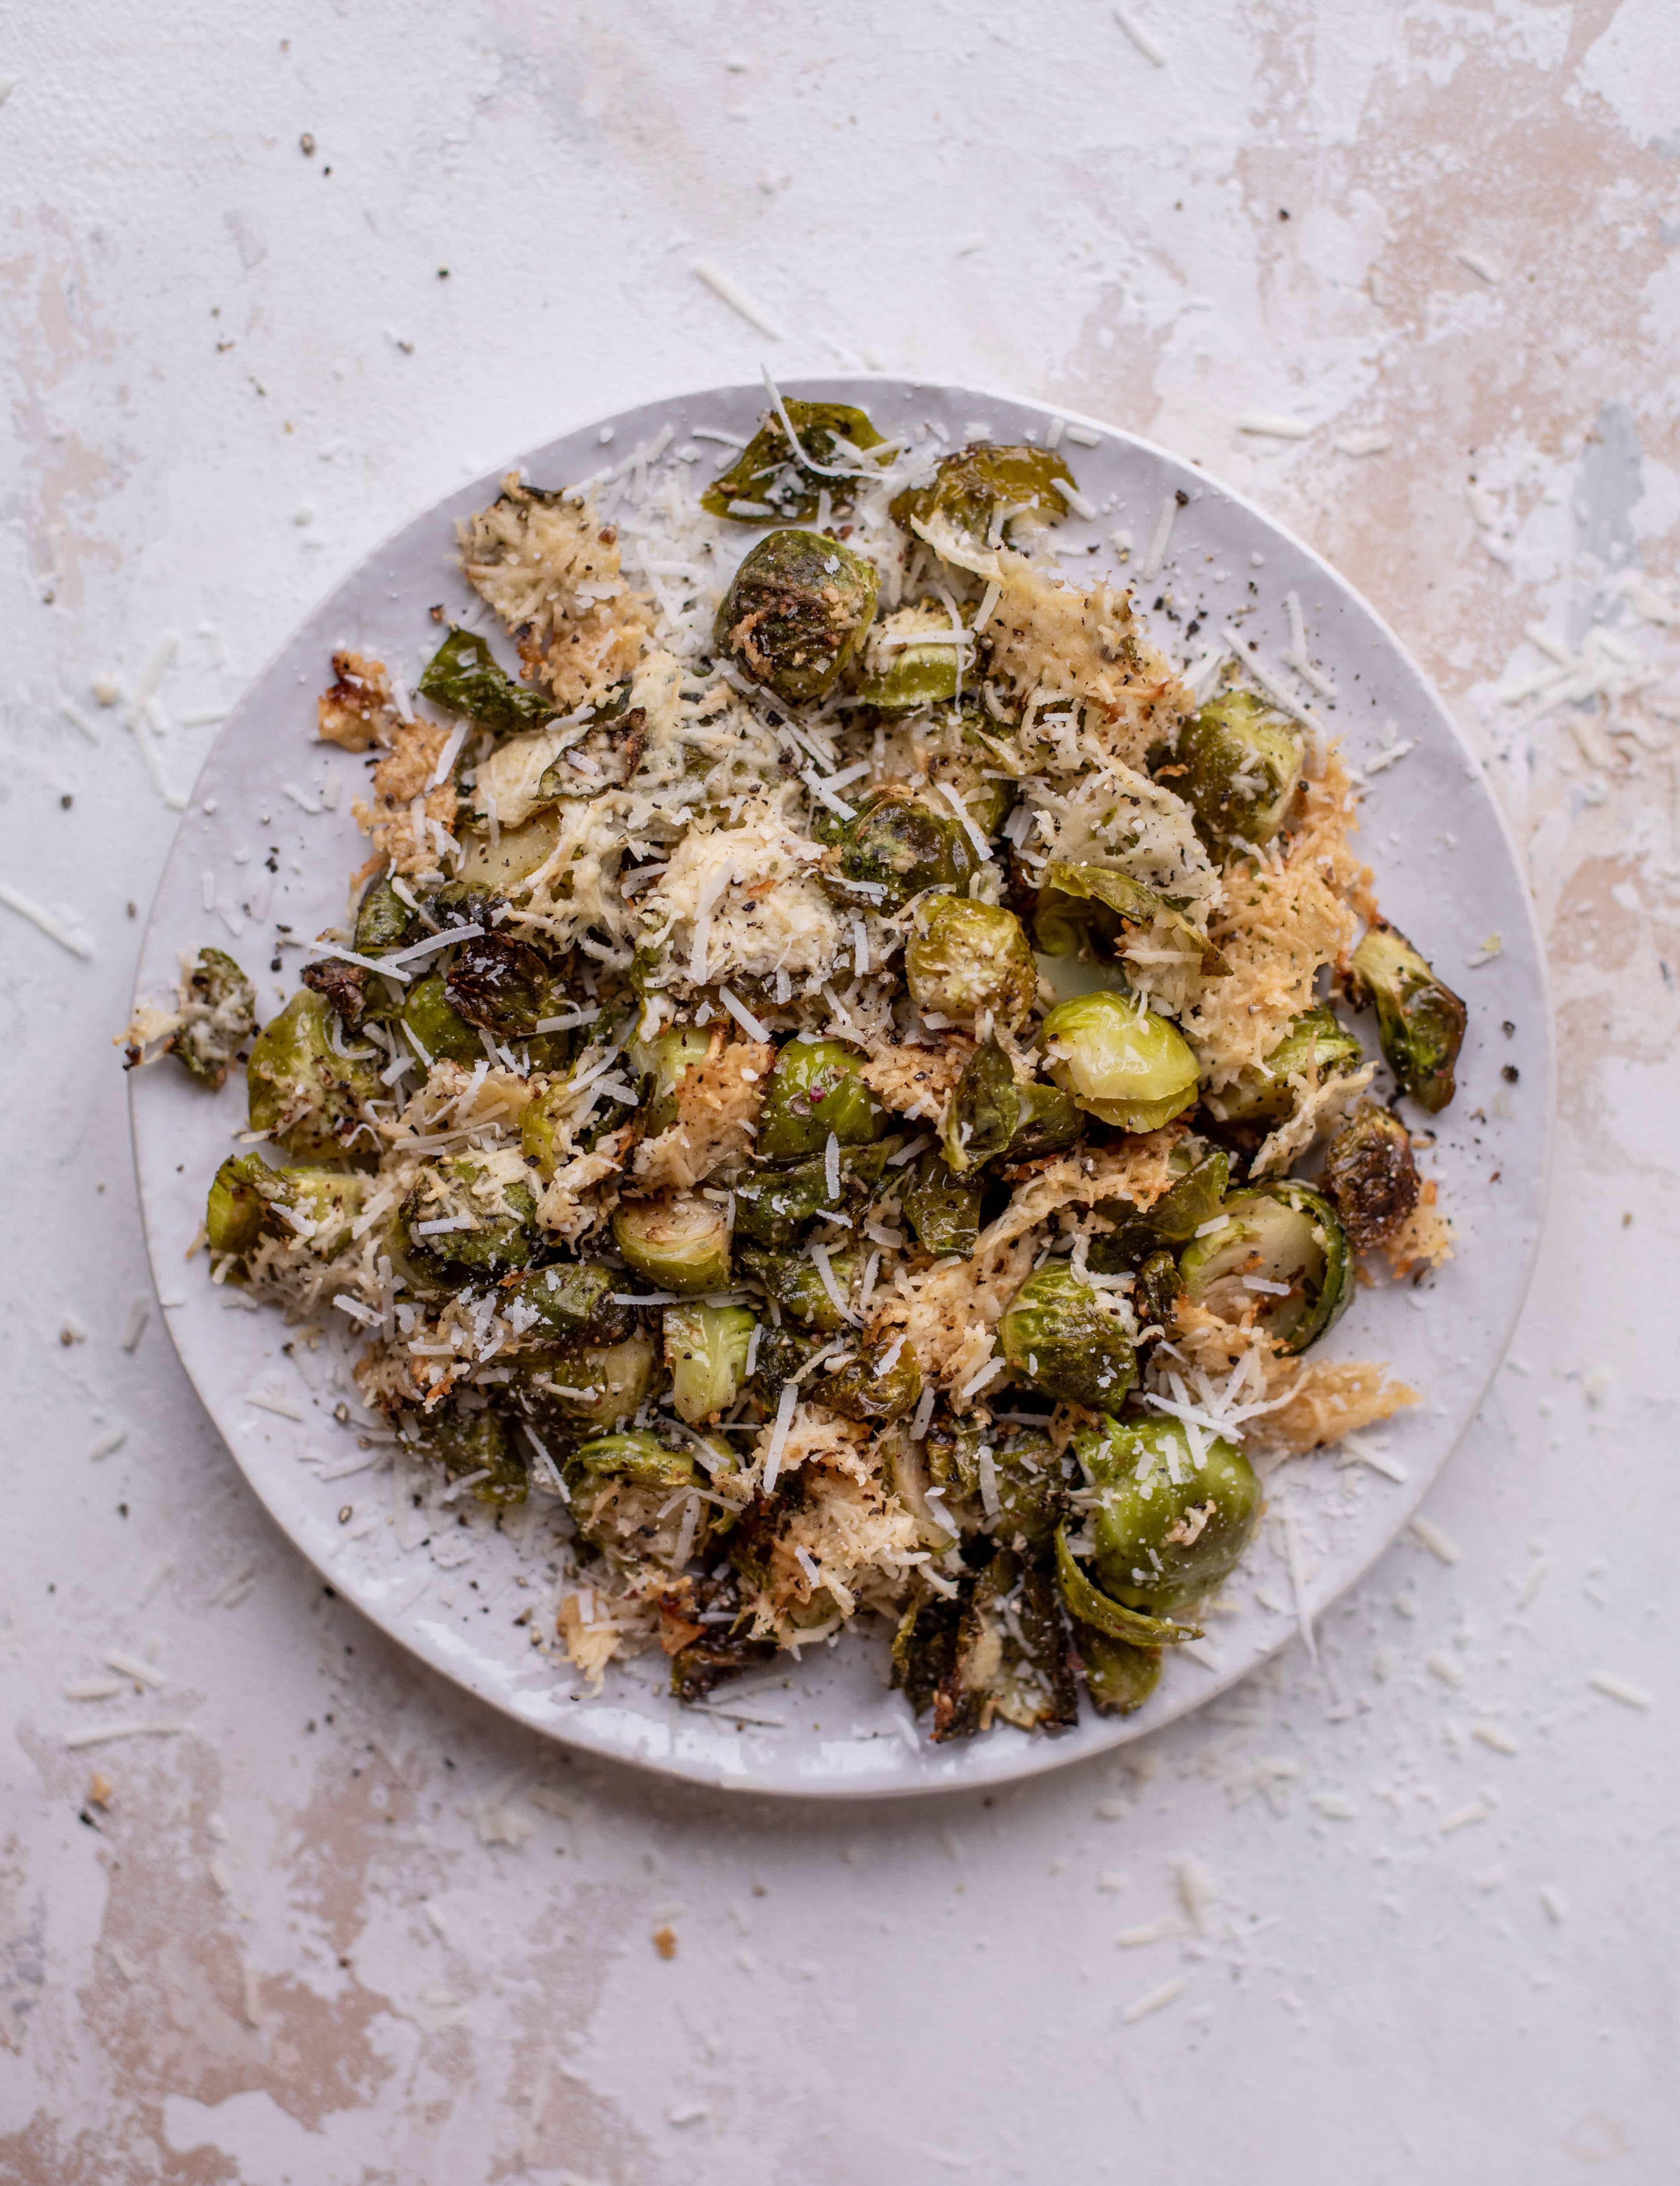 This cacio e pepe brussels are out of the world. Roasted until crisp, topped with tons of black pepper and salty pecorino cheese. Yum.